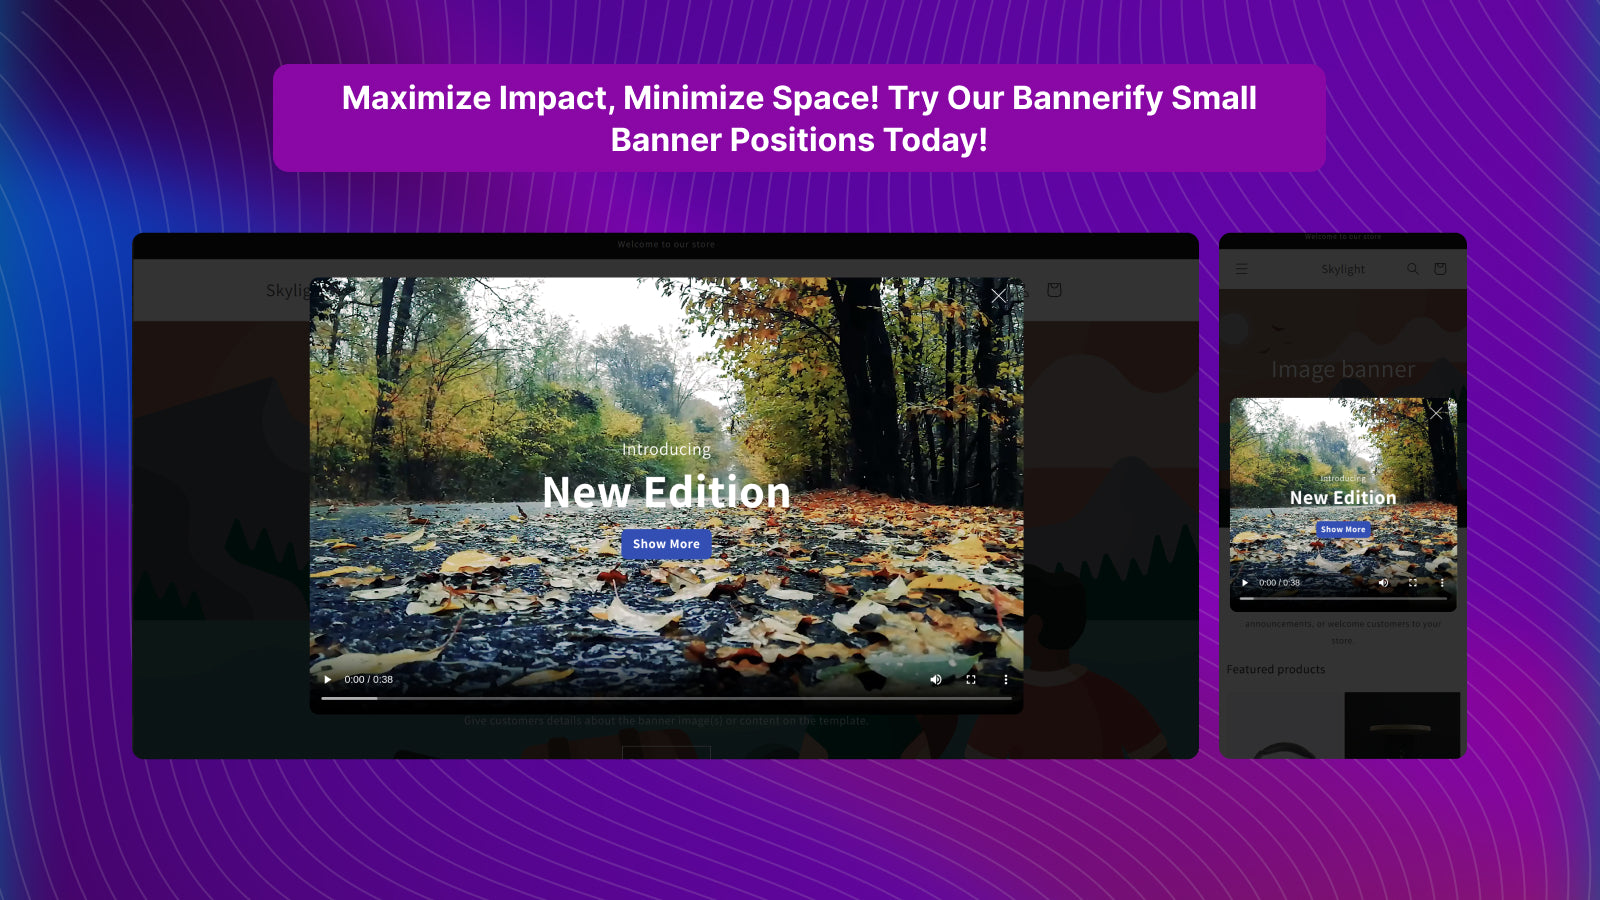 Video and text banner